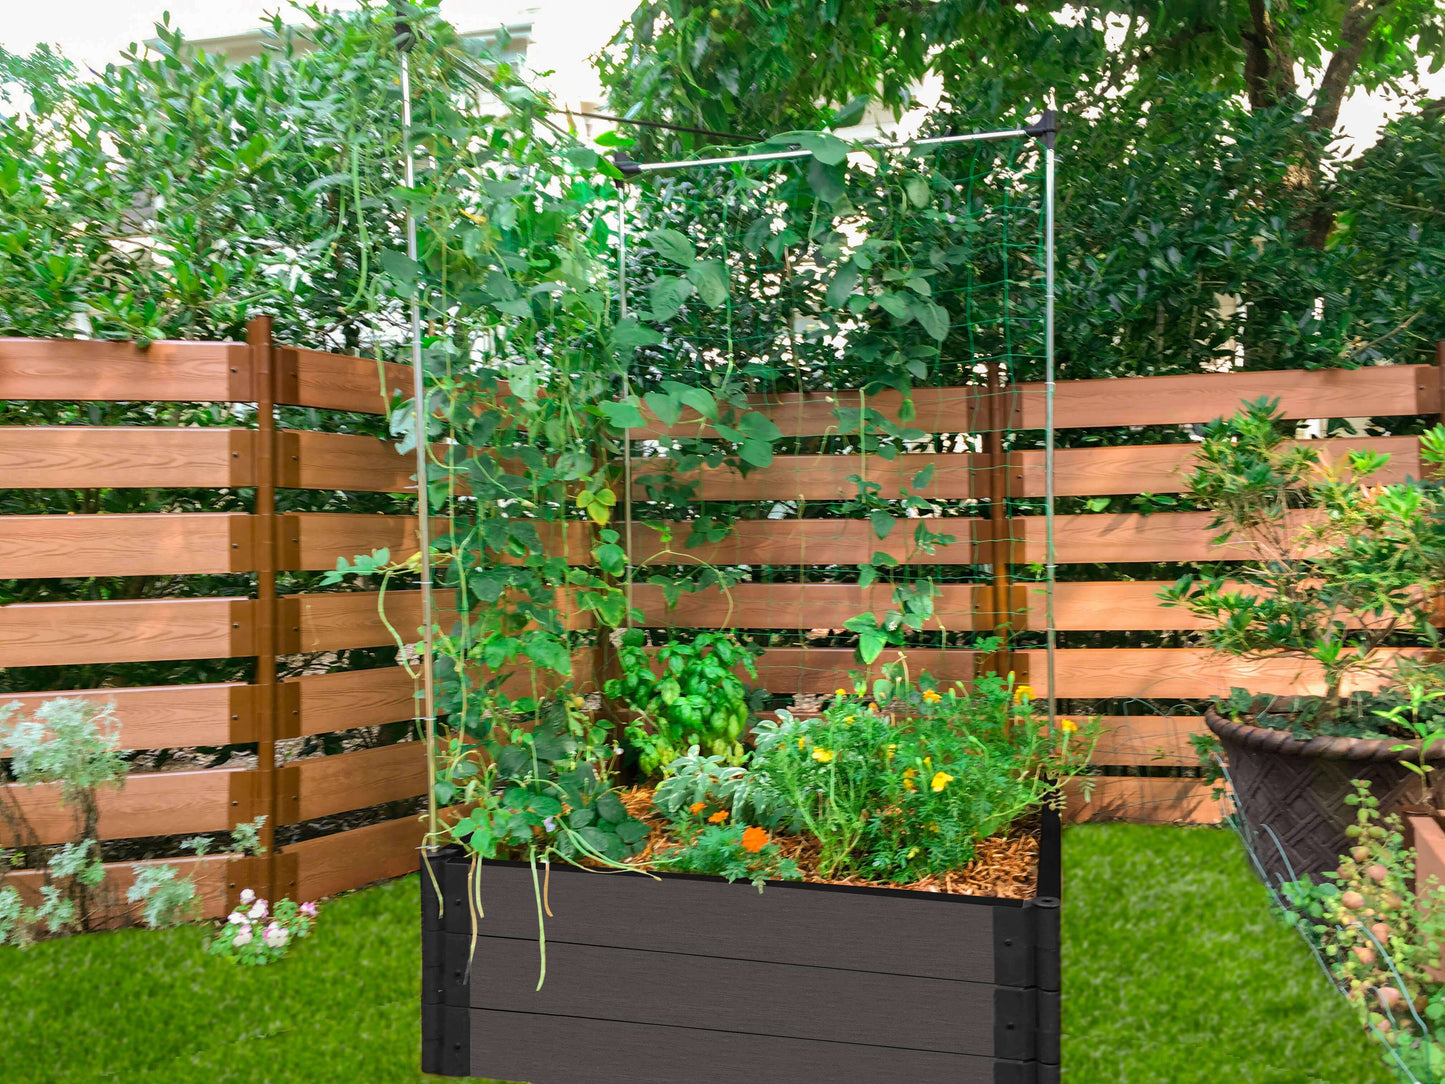 4' x 4' Raised Garden Bed with Trellis Raised Garden Beds Frame It All Weathered Wood 1" 3 = 16.5"